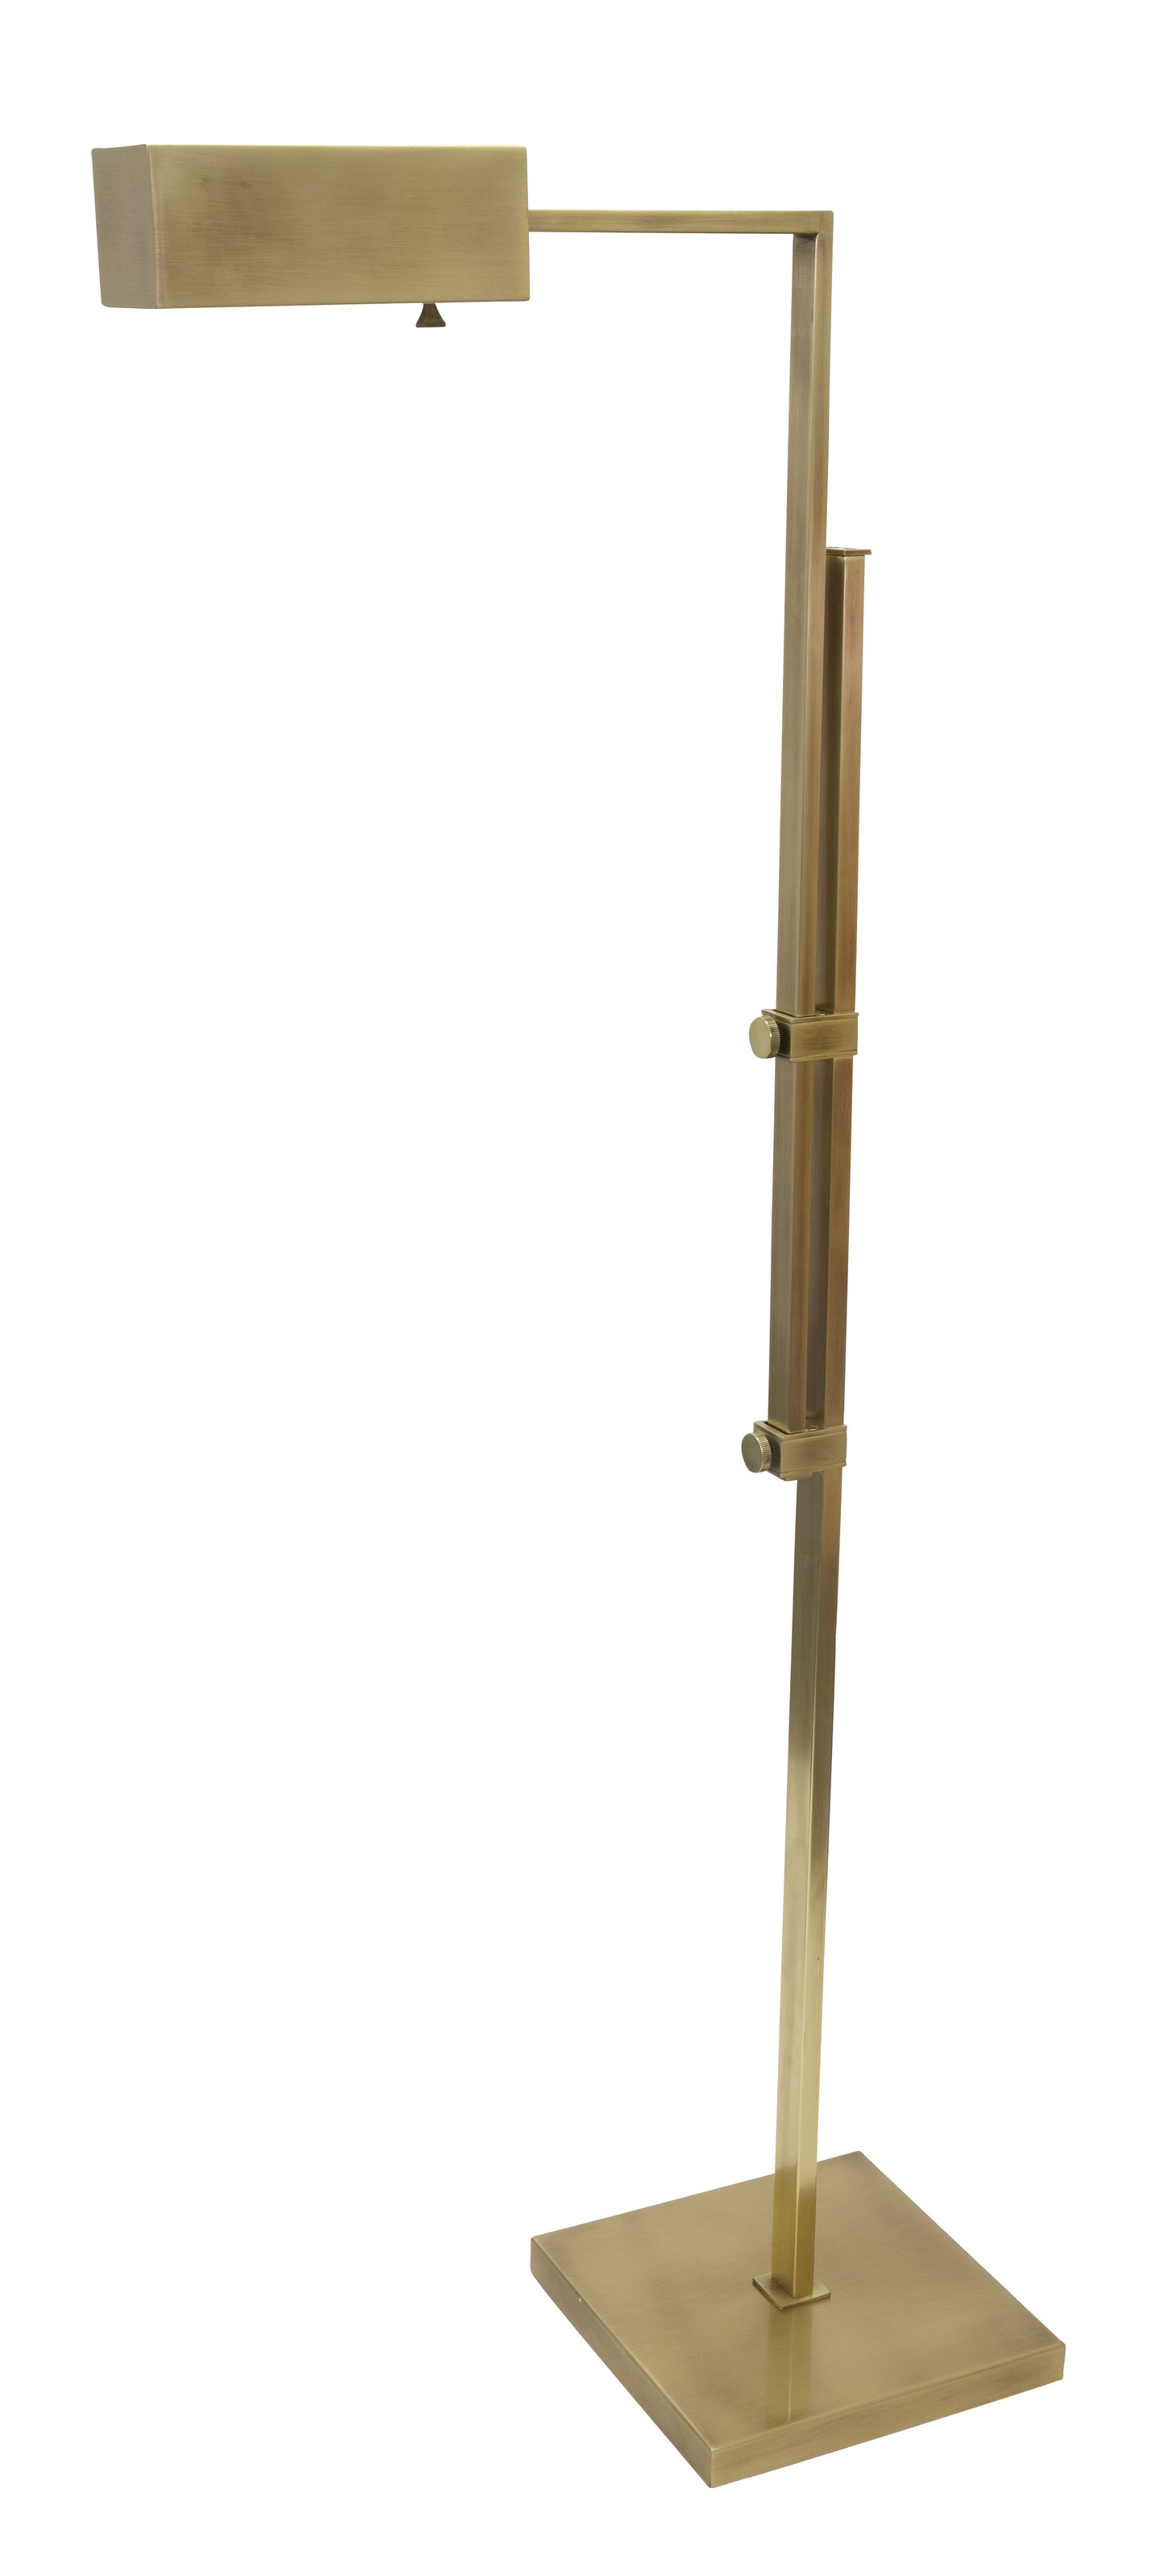 House of Troy Andover Adjustable Floor Lamp in Antique Brass AN600-AB